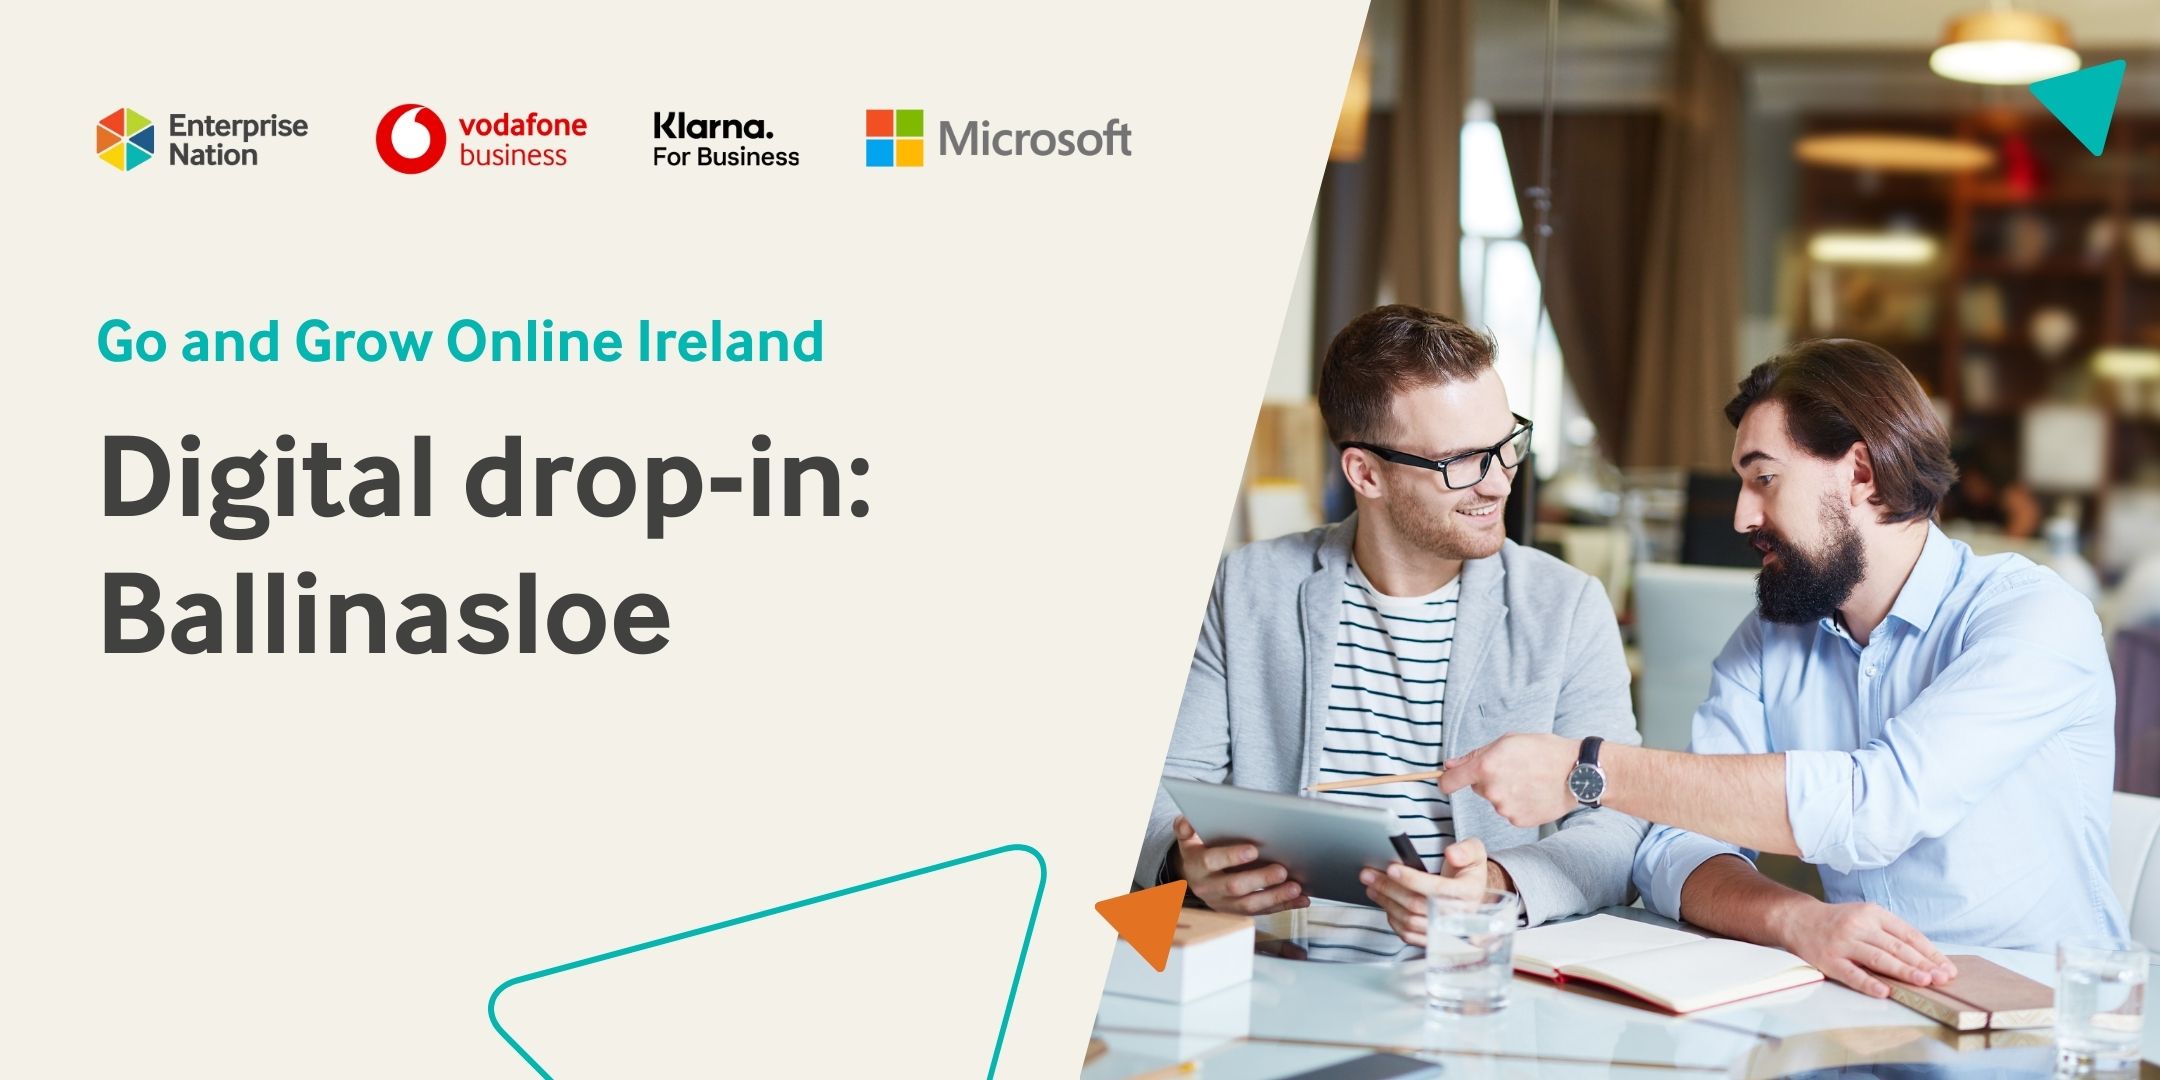 Digital drop-in for small business owners - Ballinasloe